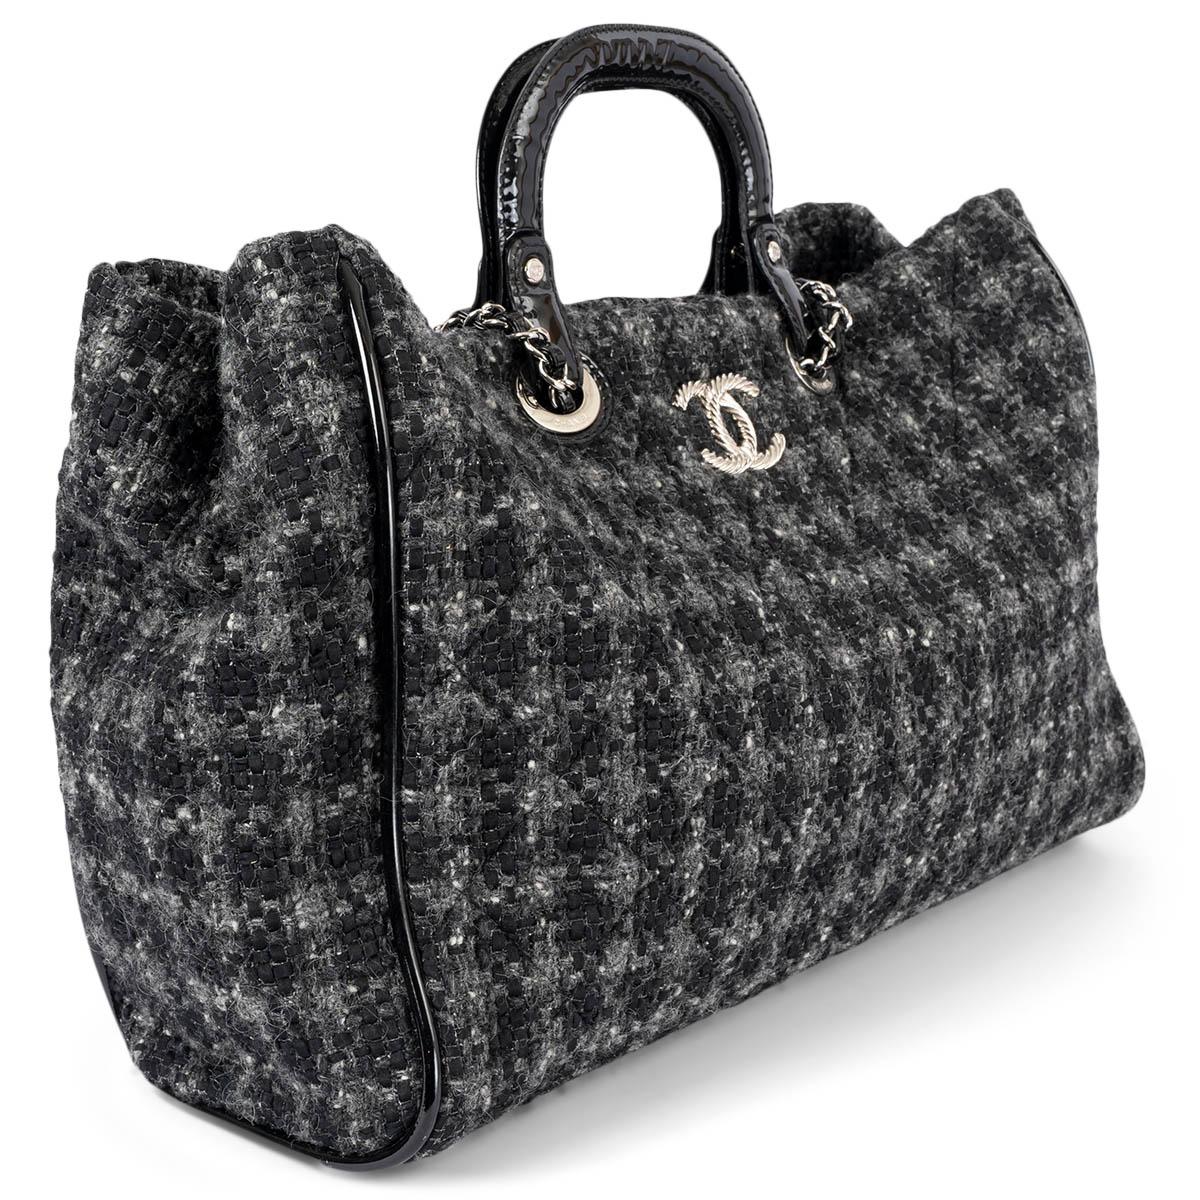 100% authentic Chanel shopper in black & grey quilted tweed and black patent leather handles and chain shoulder-strap. The design opens with a magnetic button on top and is lined black canvas with a large zipper pockets against the back and two